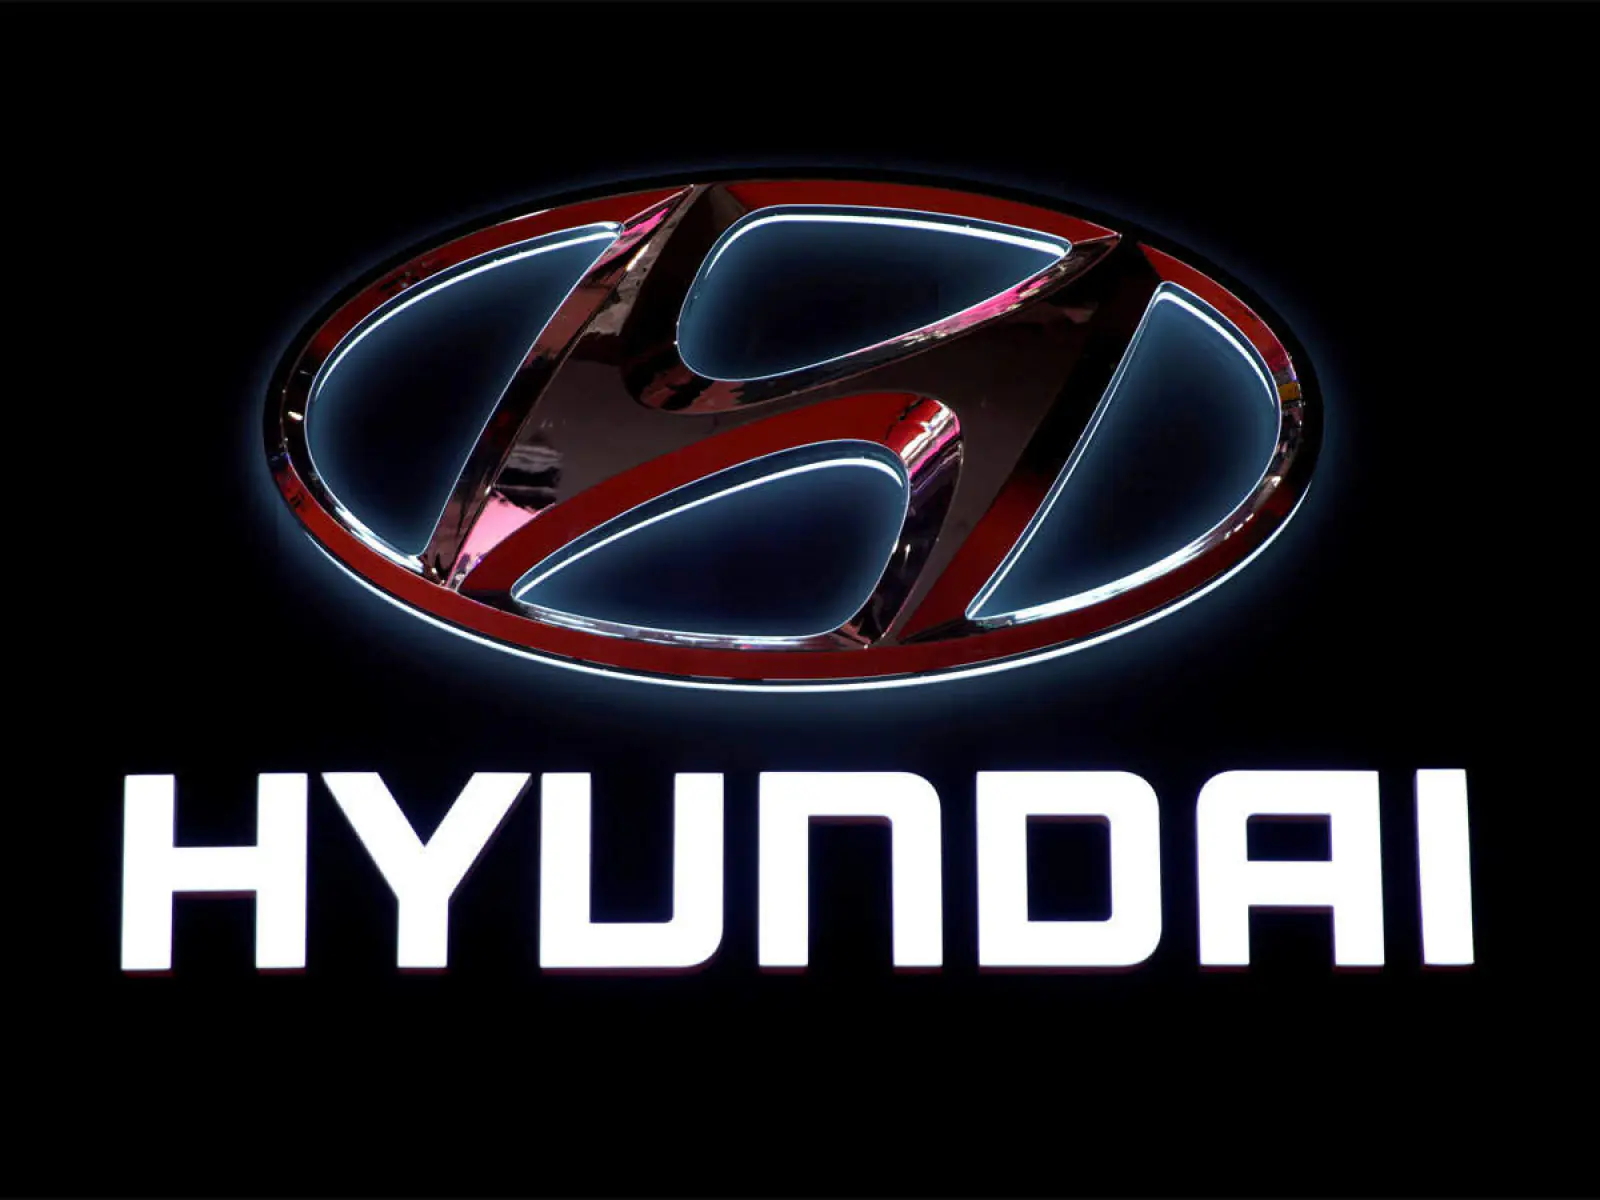 Hyundai is preparing Hybrid Cars to challenge Maruti and Toyota, know when will it be introduced